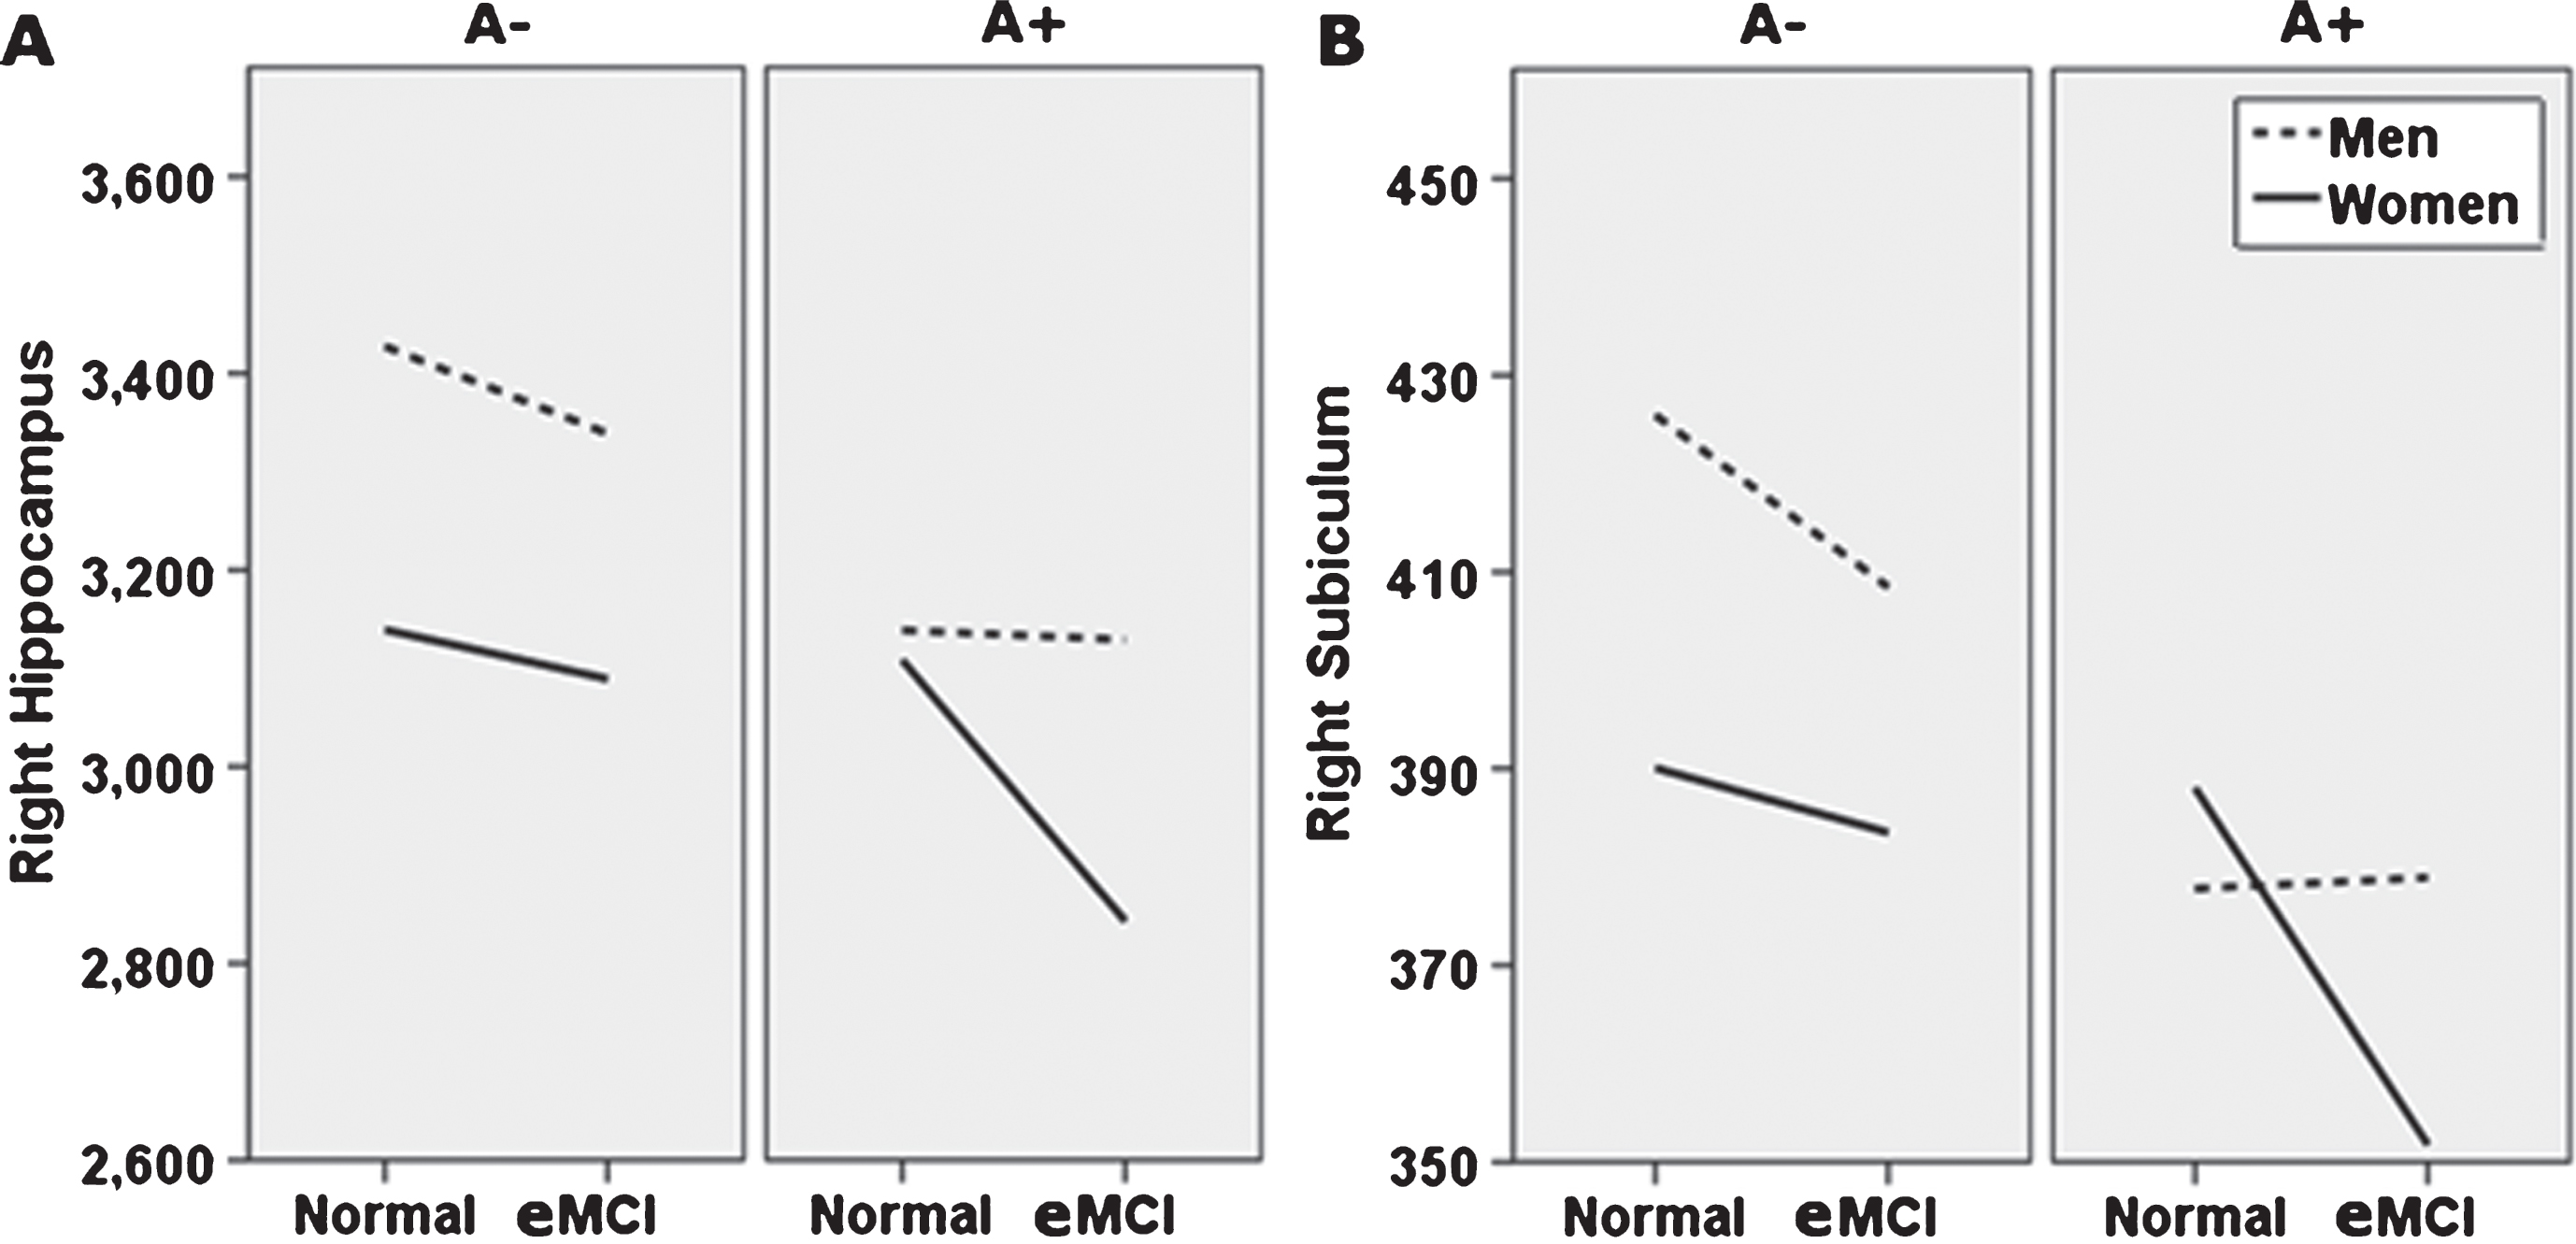 Alternate presentation of sex moderation of diagnosis and amyloid status effects (breakdown by amyloid status). Sex moderates effects of diagnosis and Florbetapir PET amyloid positivity (A+) on right whole hippocampal volume (A), and right subiculum (B). Specifically, normal control (NC) women with A+ show whole and subfield volumes more comparable to NC women with a negative amyloid PET (A−), while NC men do not. At the early mild cognitive impairment (eMCI) stage, effects of A+ on total and subfield volume did not differ by sex, but generally related to smaller volumes across participants. Although not directly tested in this analysis, as shown, this figure also suggests that for A+ individuals, receiving an eMCI diagnosis is related to smaller volumes, specifically in women. A–, 18F-PET amyloid negative; A+, 18F-PET amyloid positive. For ease of viewing, hippocampus and subfield volume units are raw, uncorrected, in milimeters3.